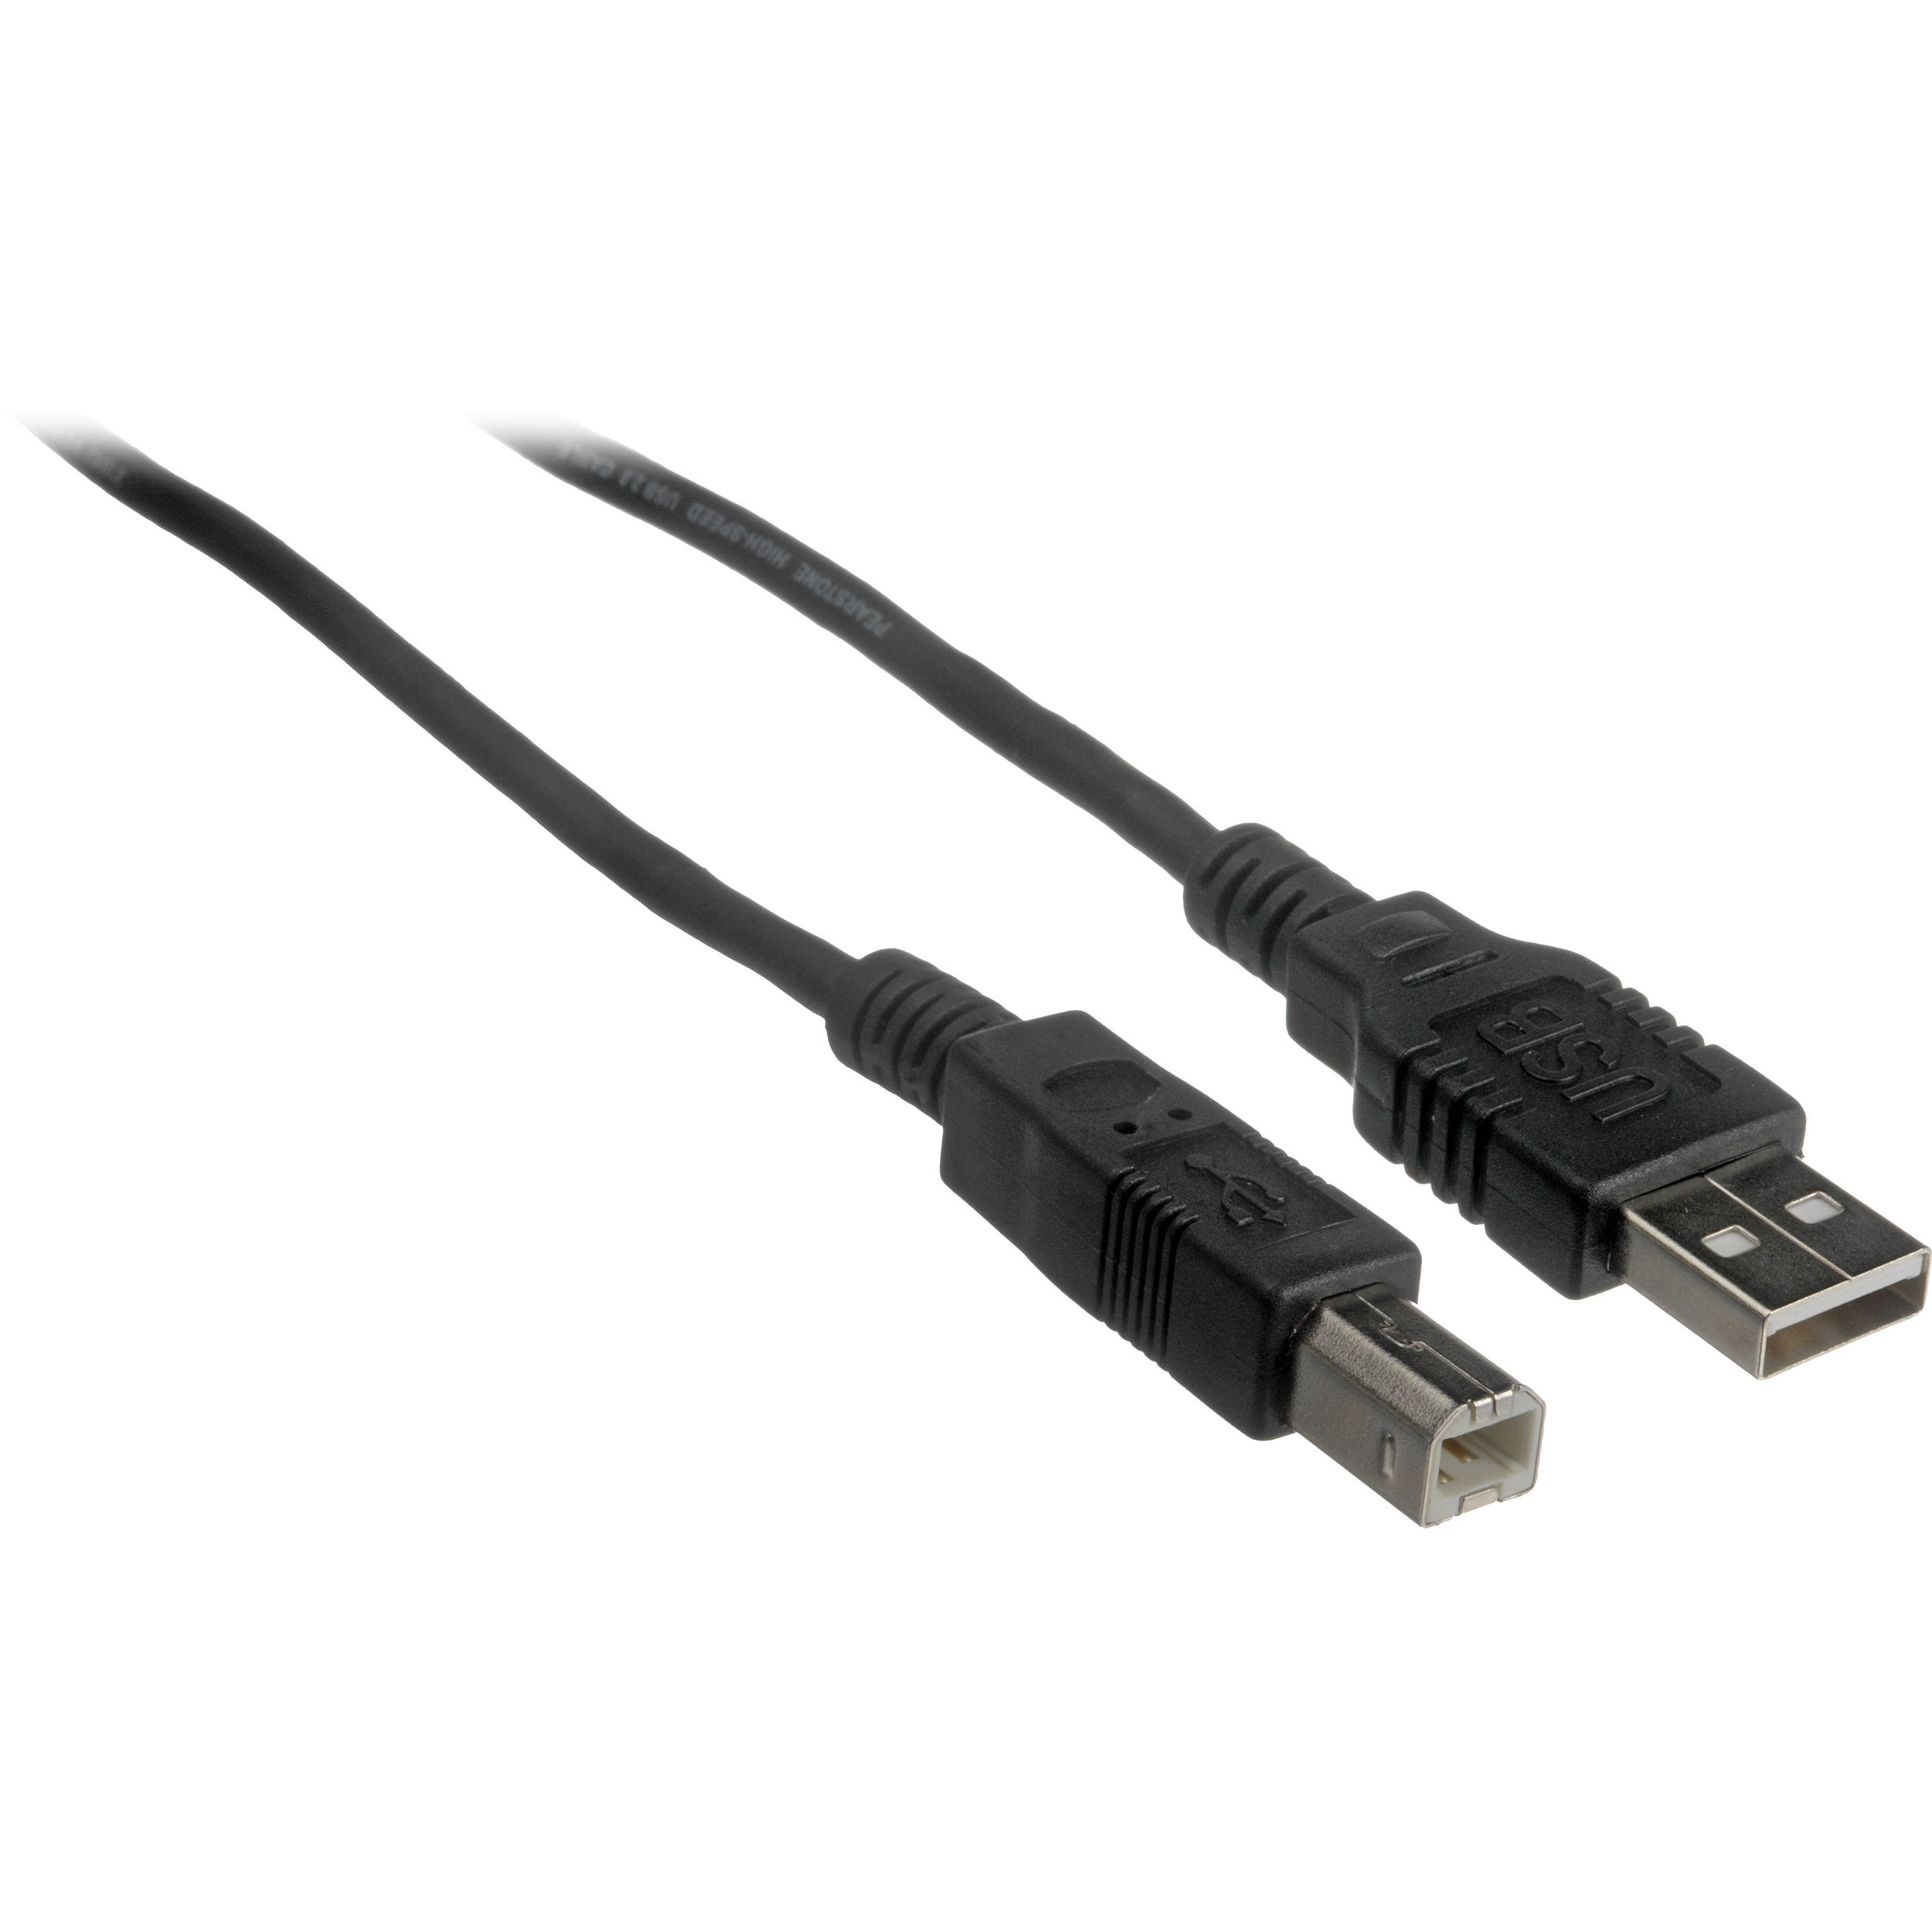 16 Feet 4.8 Meters Basics USB 2.0 Cable A-Male to B-Male